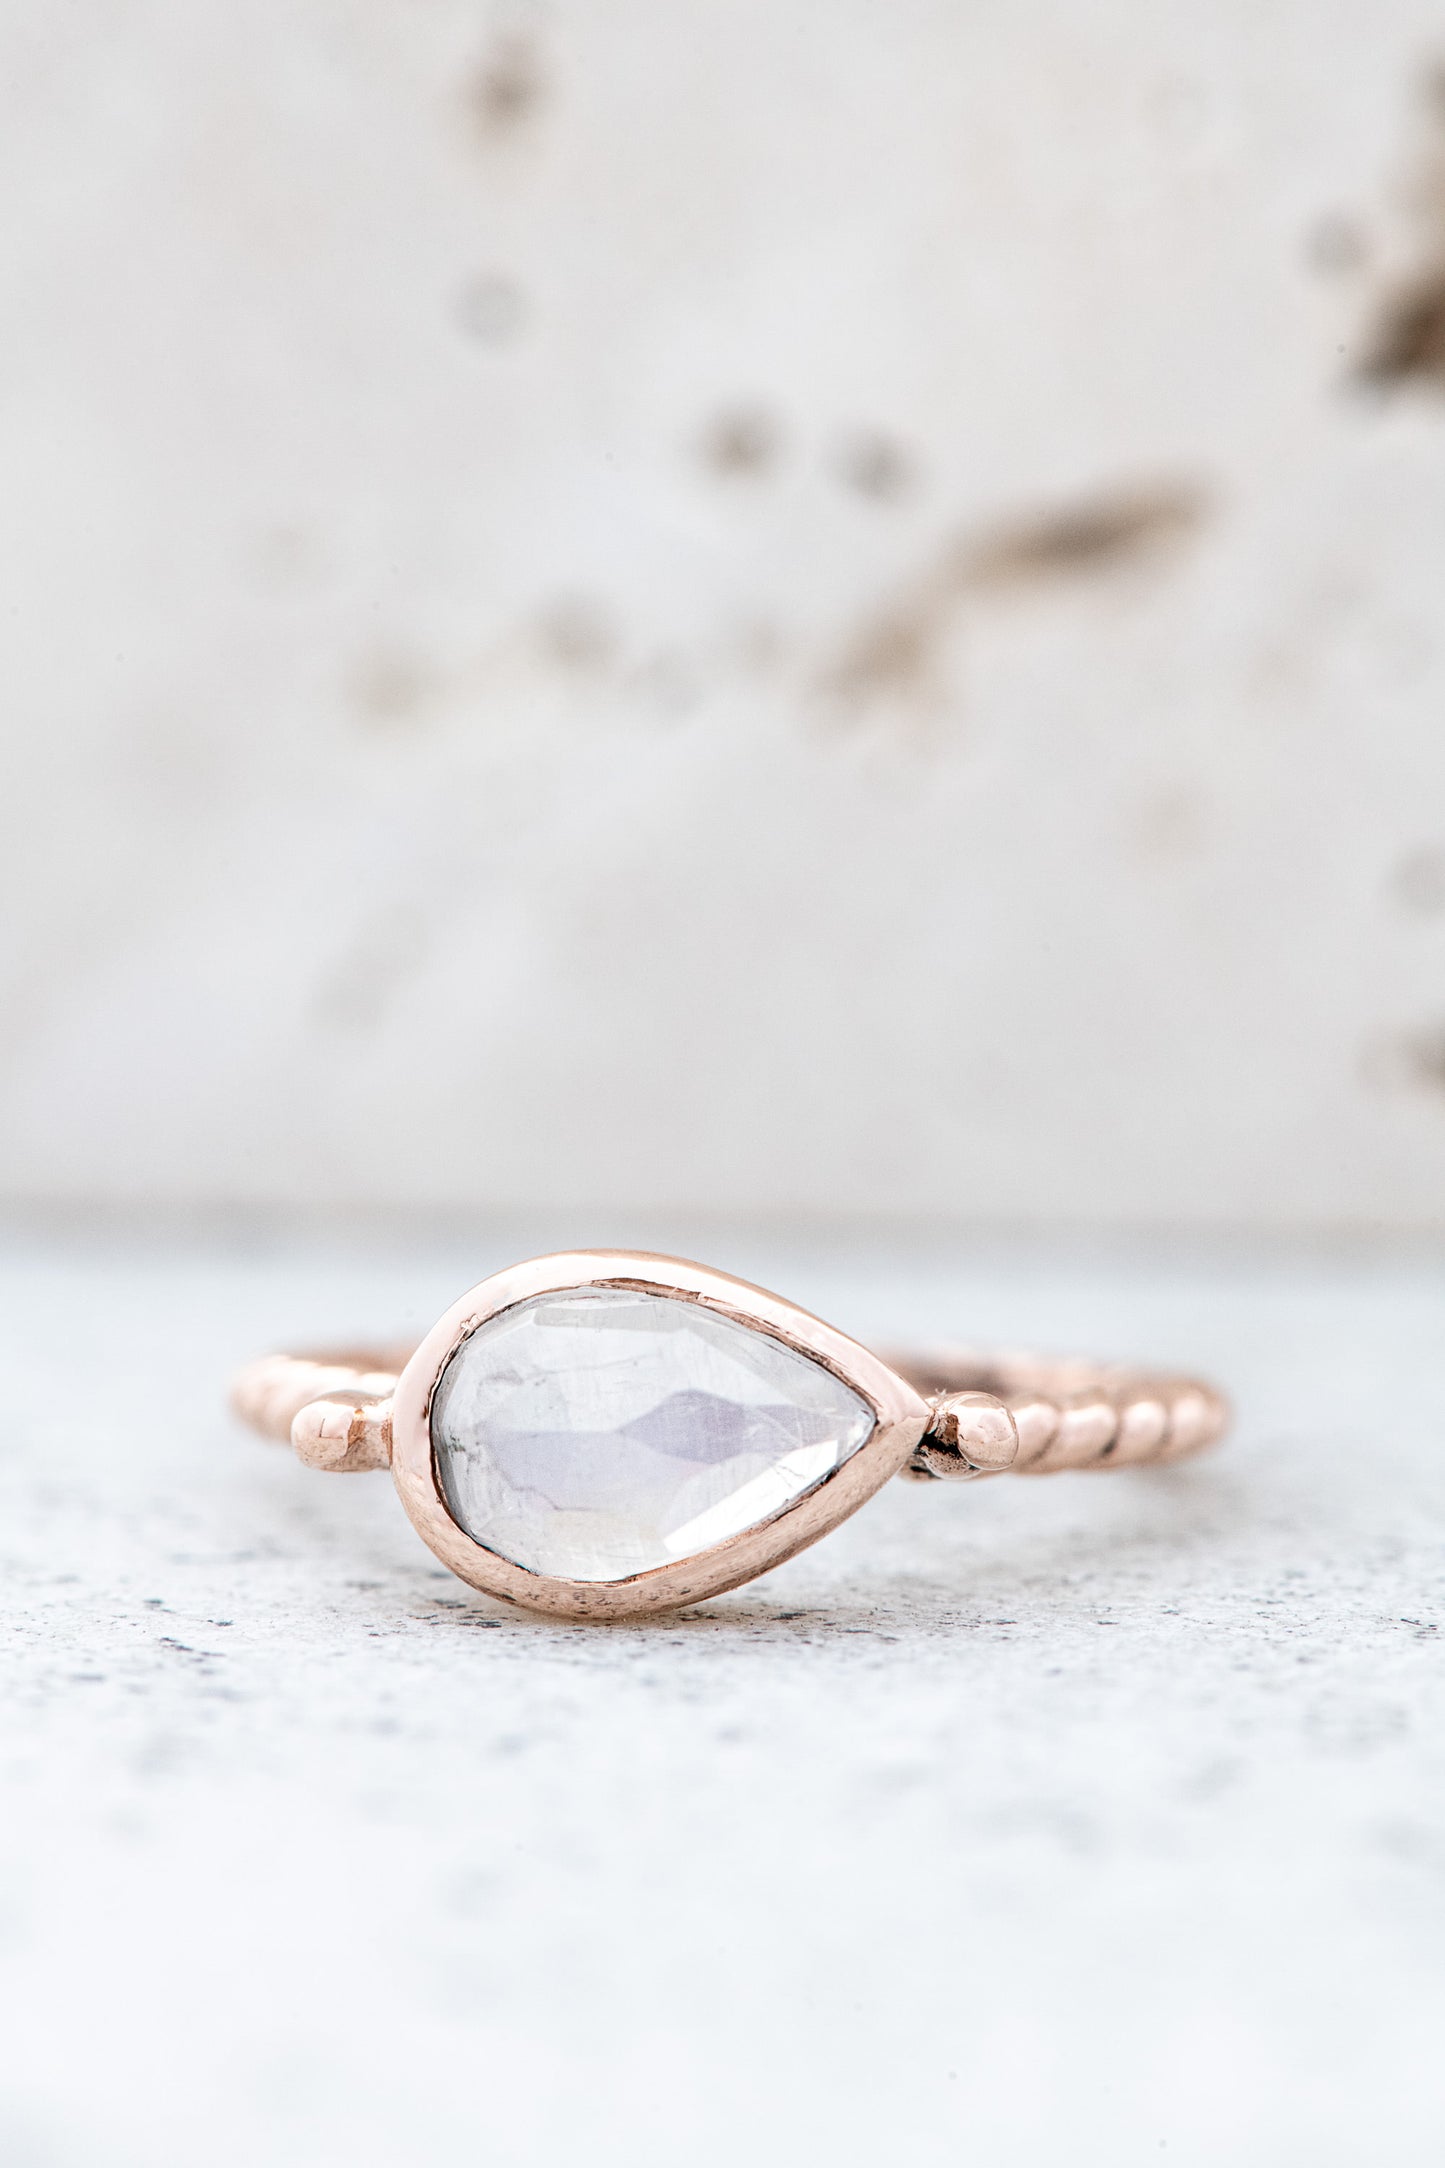 A handmade rose gold ring adorned with a stunning Pear Shaped Rainbow Moonstone.